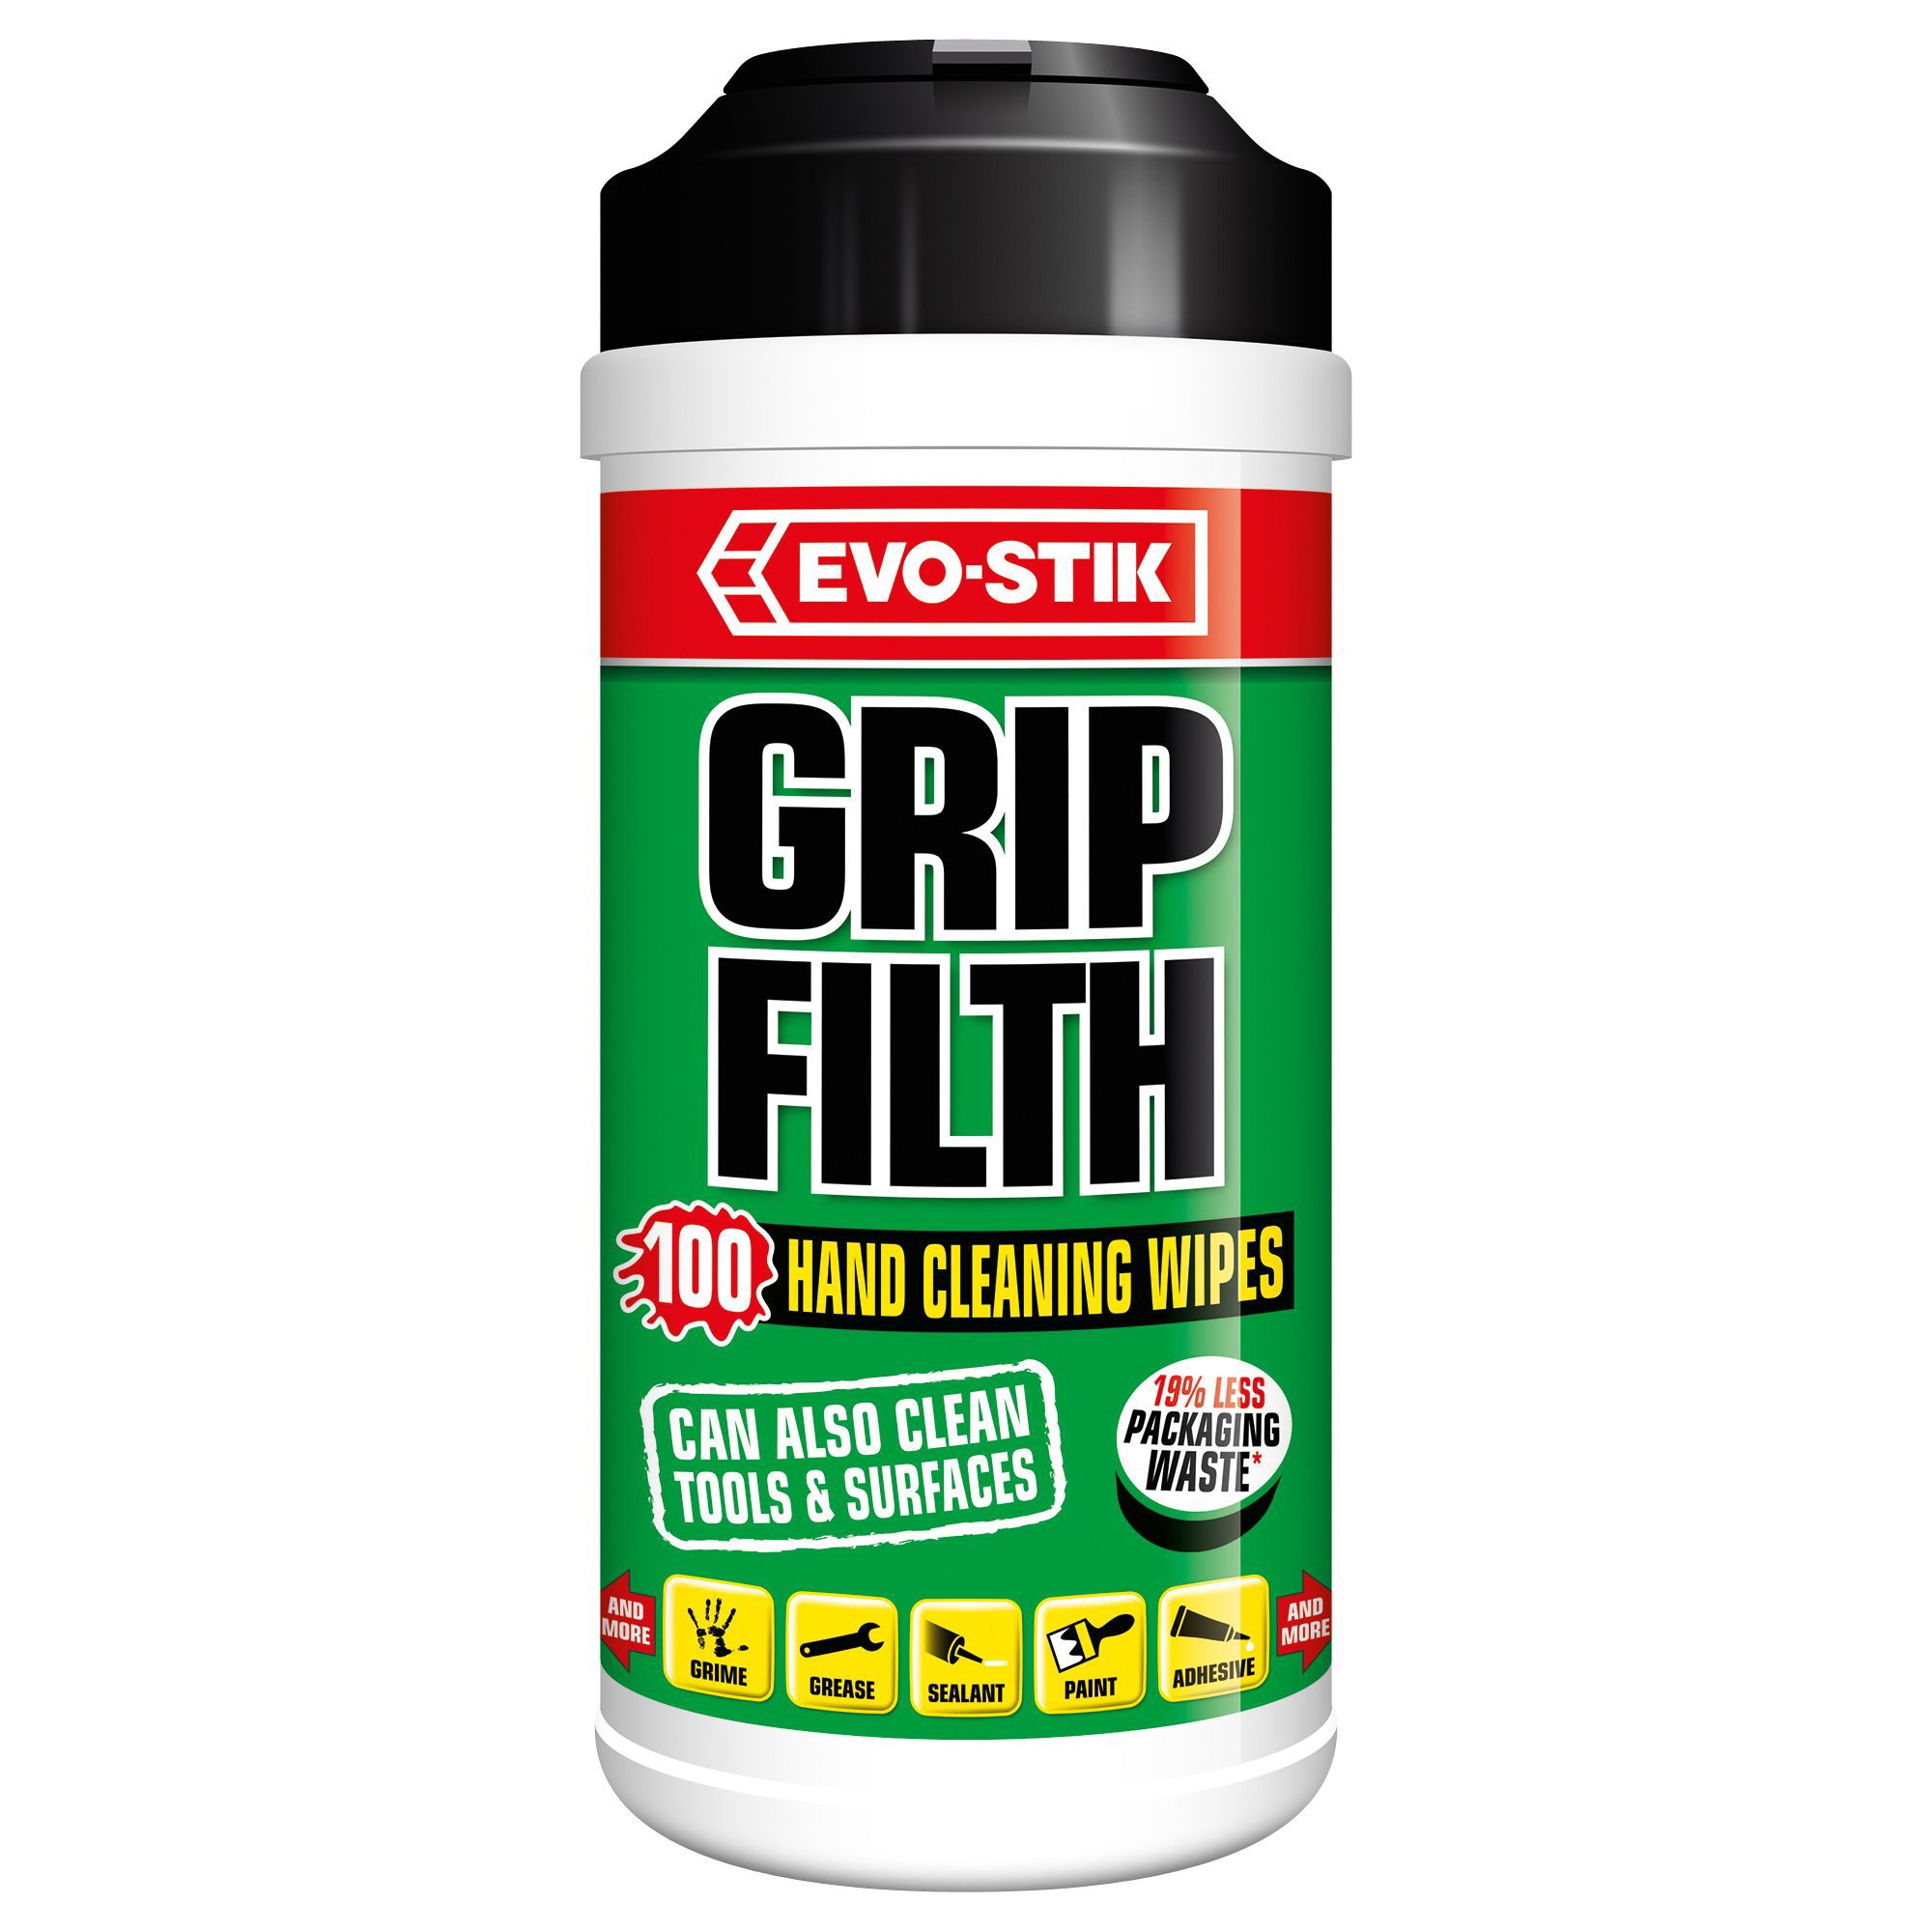 https://media.diy.com/is/image/Kingfisher/evo-stik-gripfilth-cleaning-wipes-pack-of-100~5000403114002_02c?$MOB_PREV$&$width=768&$height=768